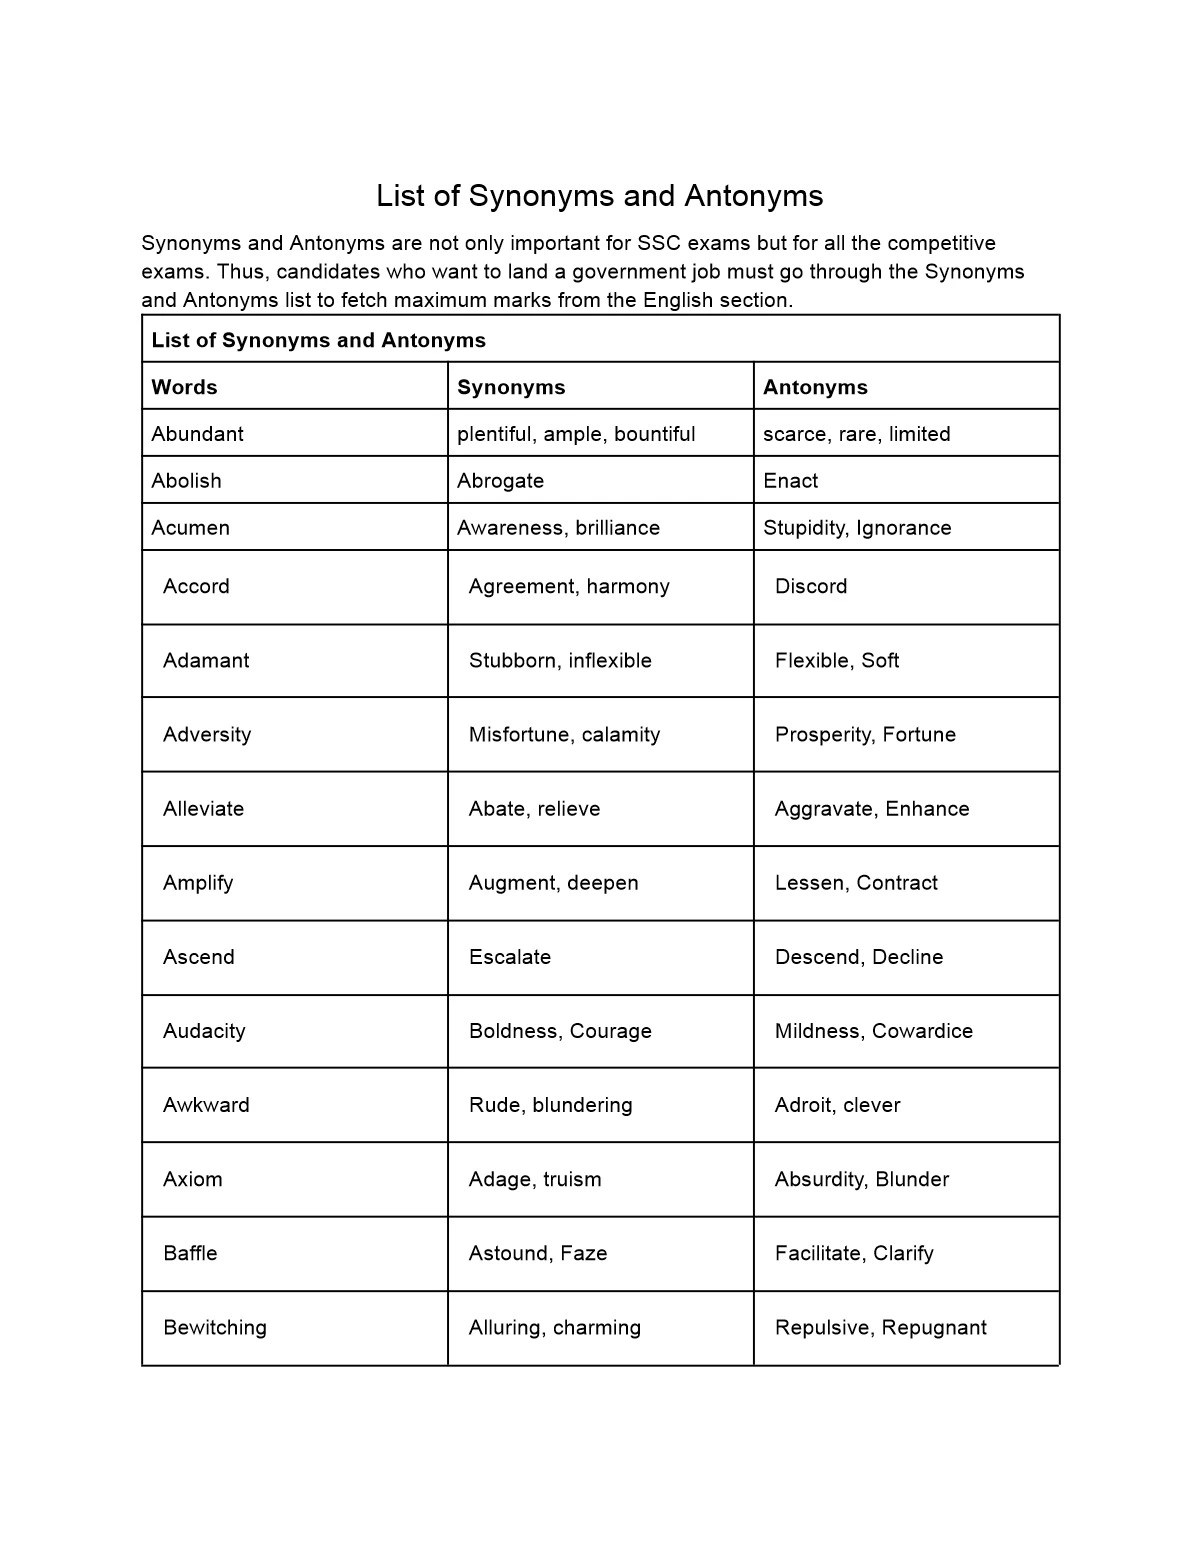 Synonyms and Antonyms List from A to Z